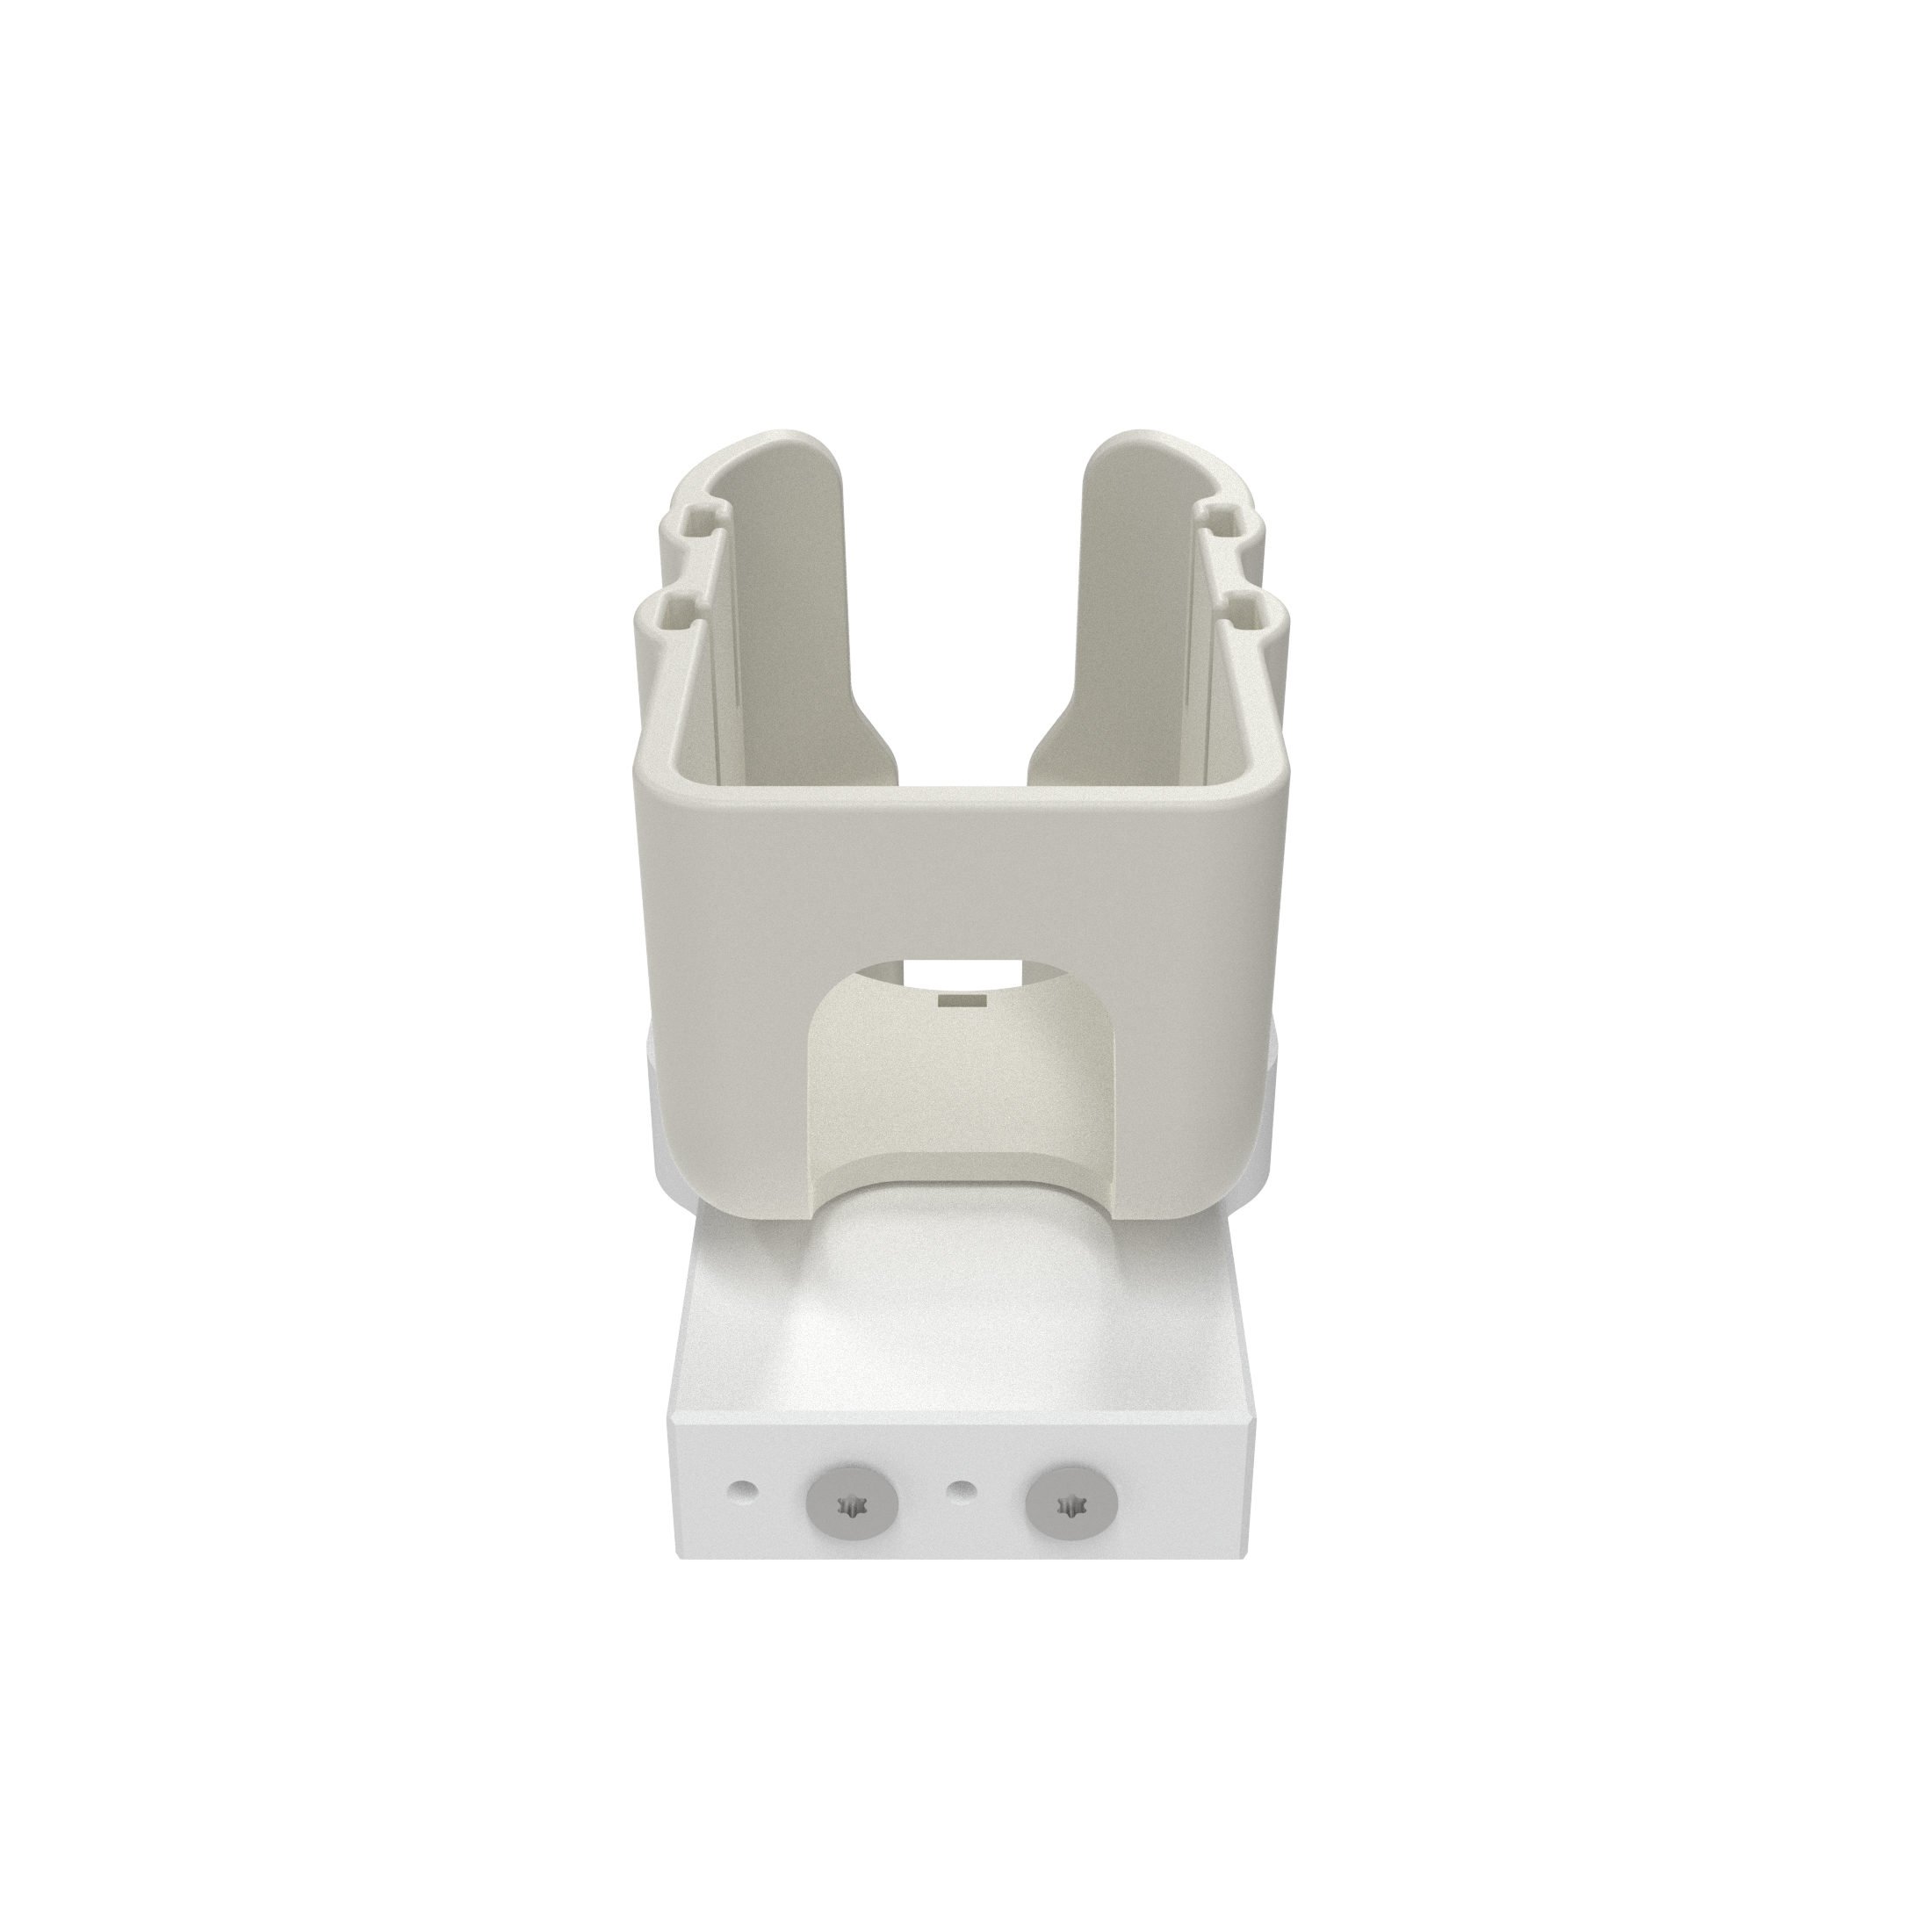 Plug holder for hygienic rear wall / protector